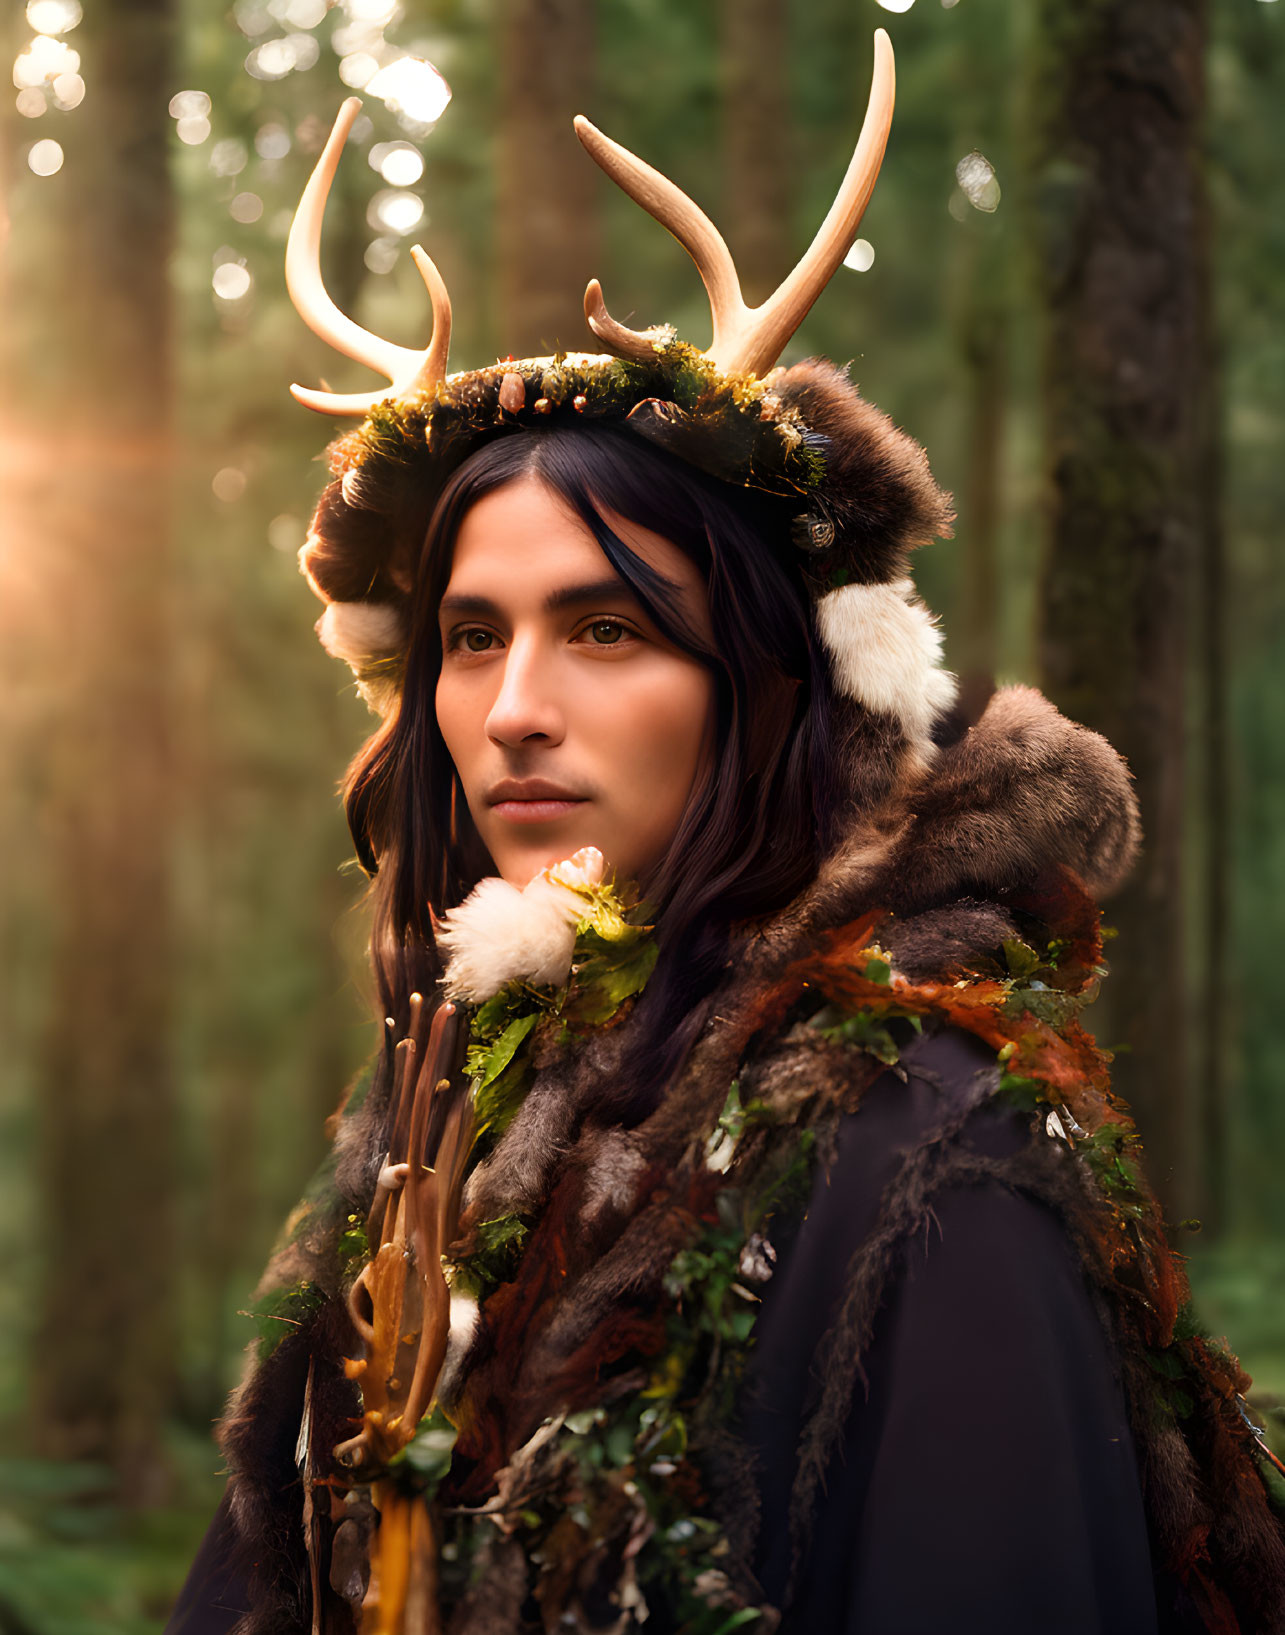 Person in forest wearing antler headdress with fur and greenery, looking contemplative